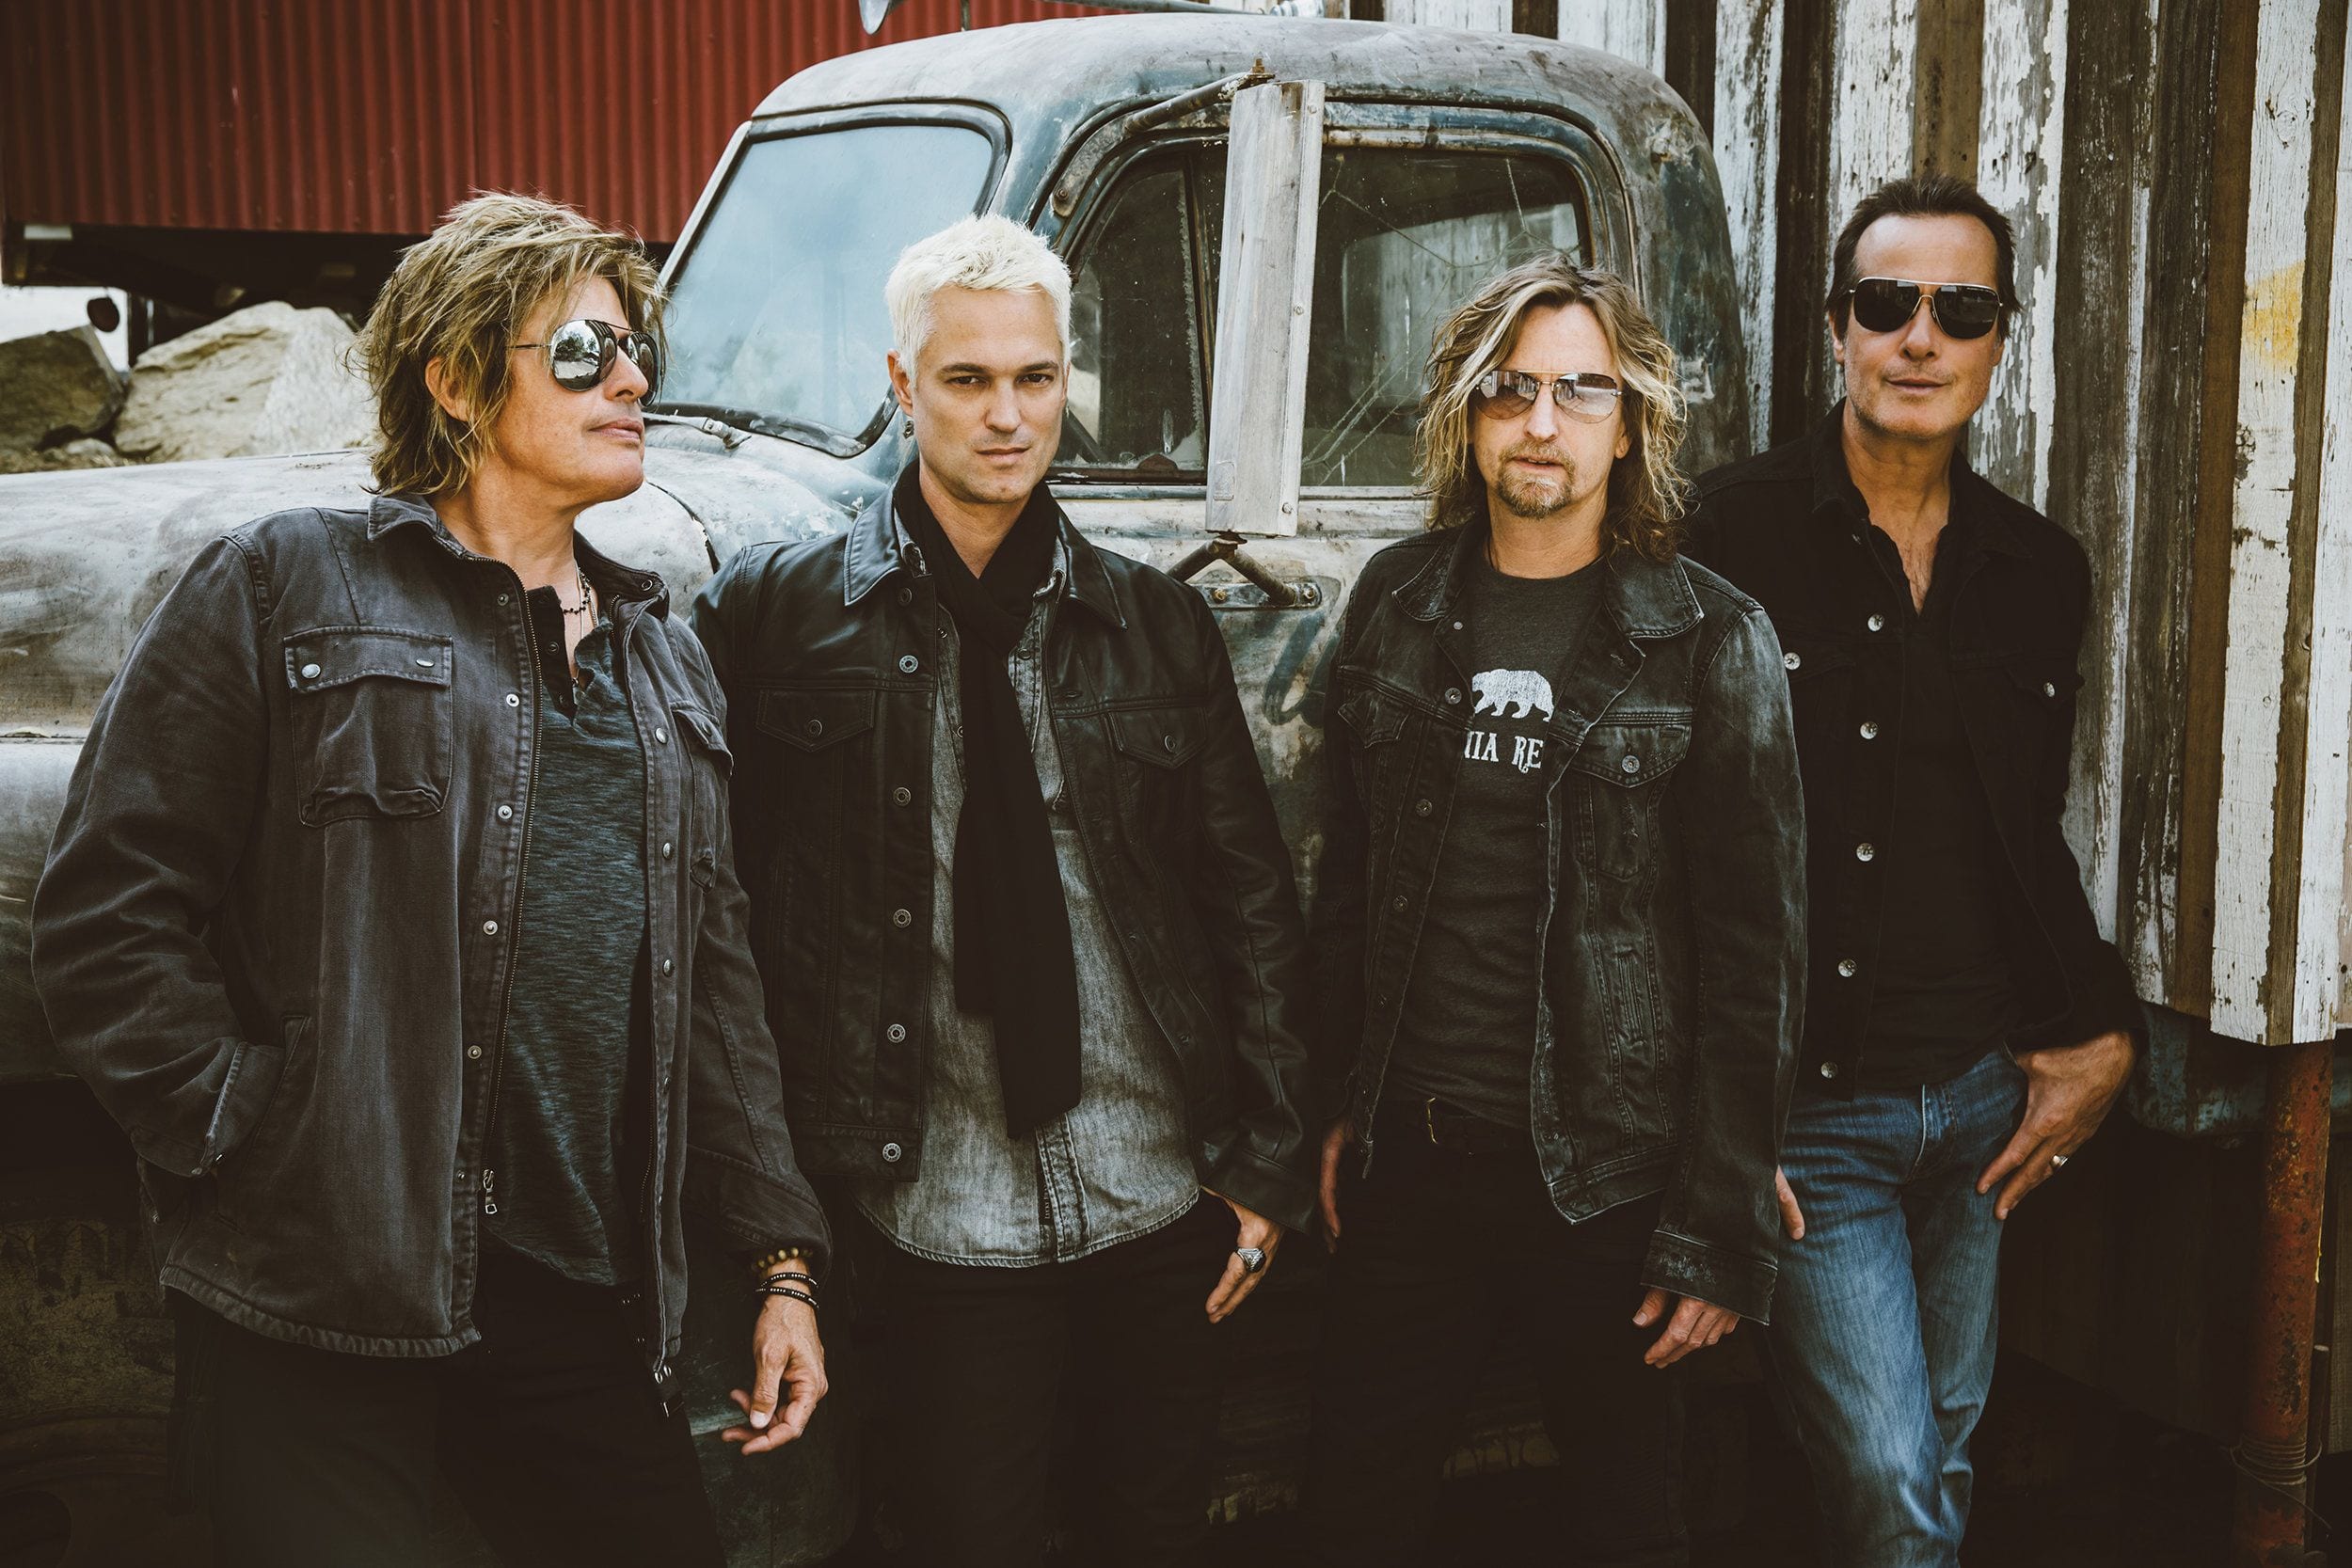 Stone Temple Pilots Return With a New Singer and a Familiar-Sounding Album